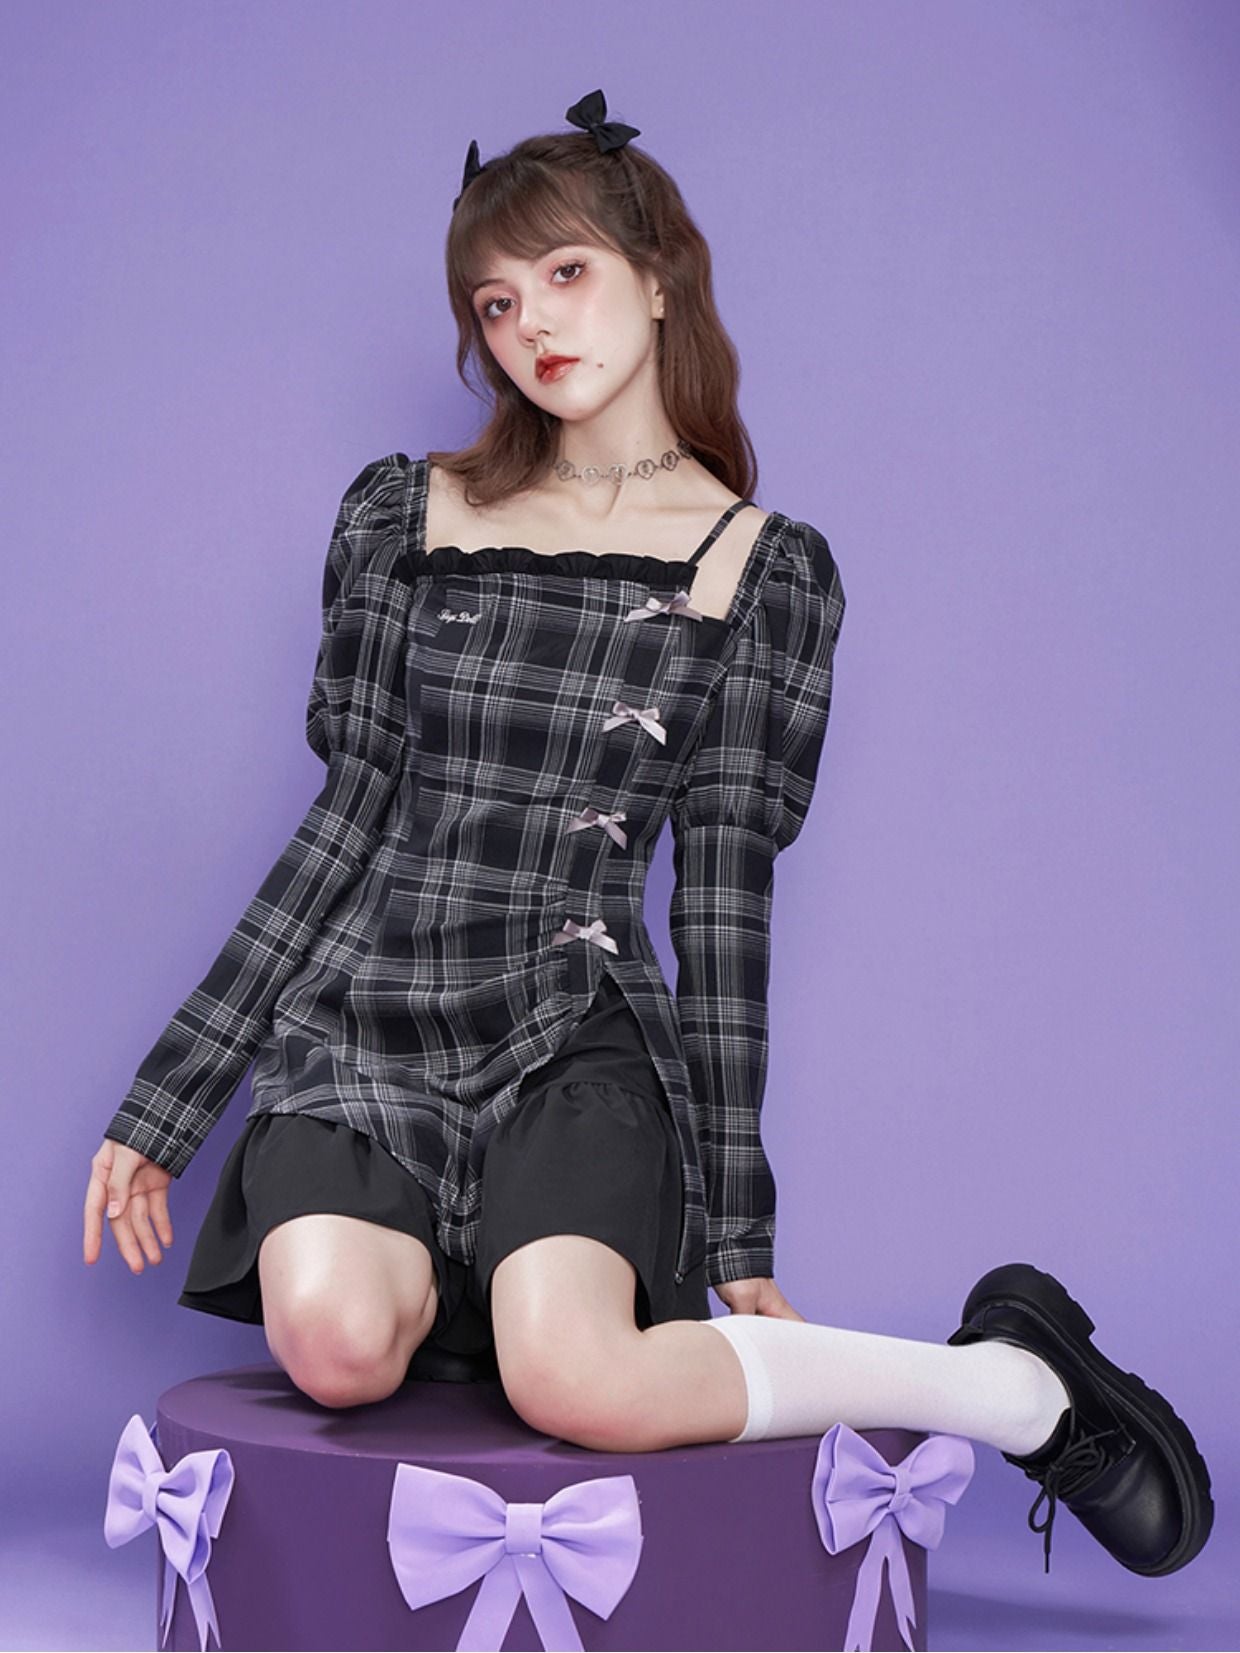 Checked Ribbon Frill Girly ONE-PIECE